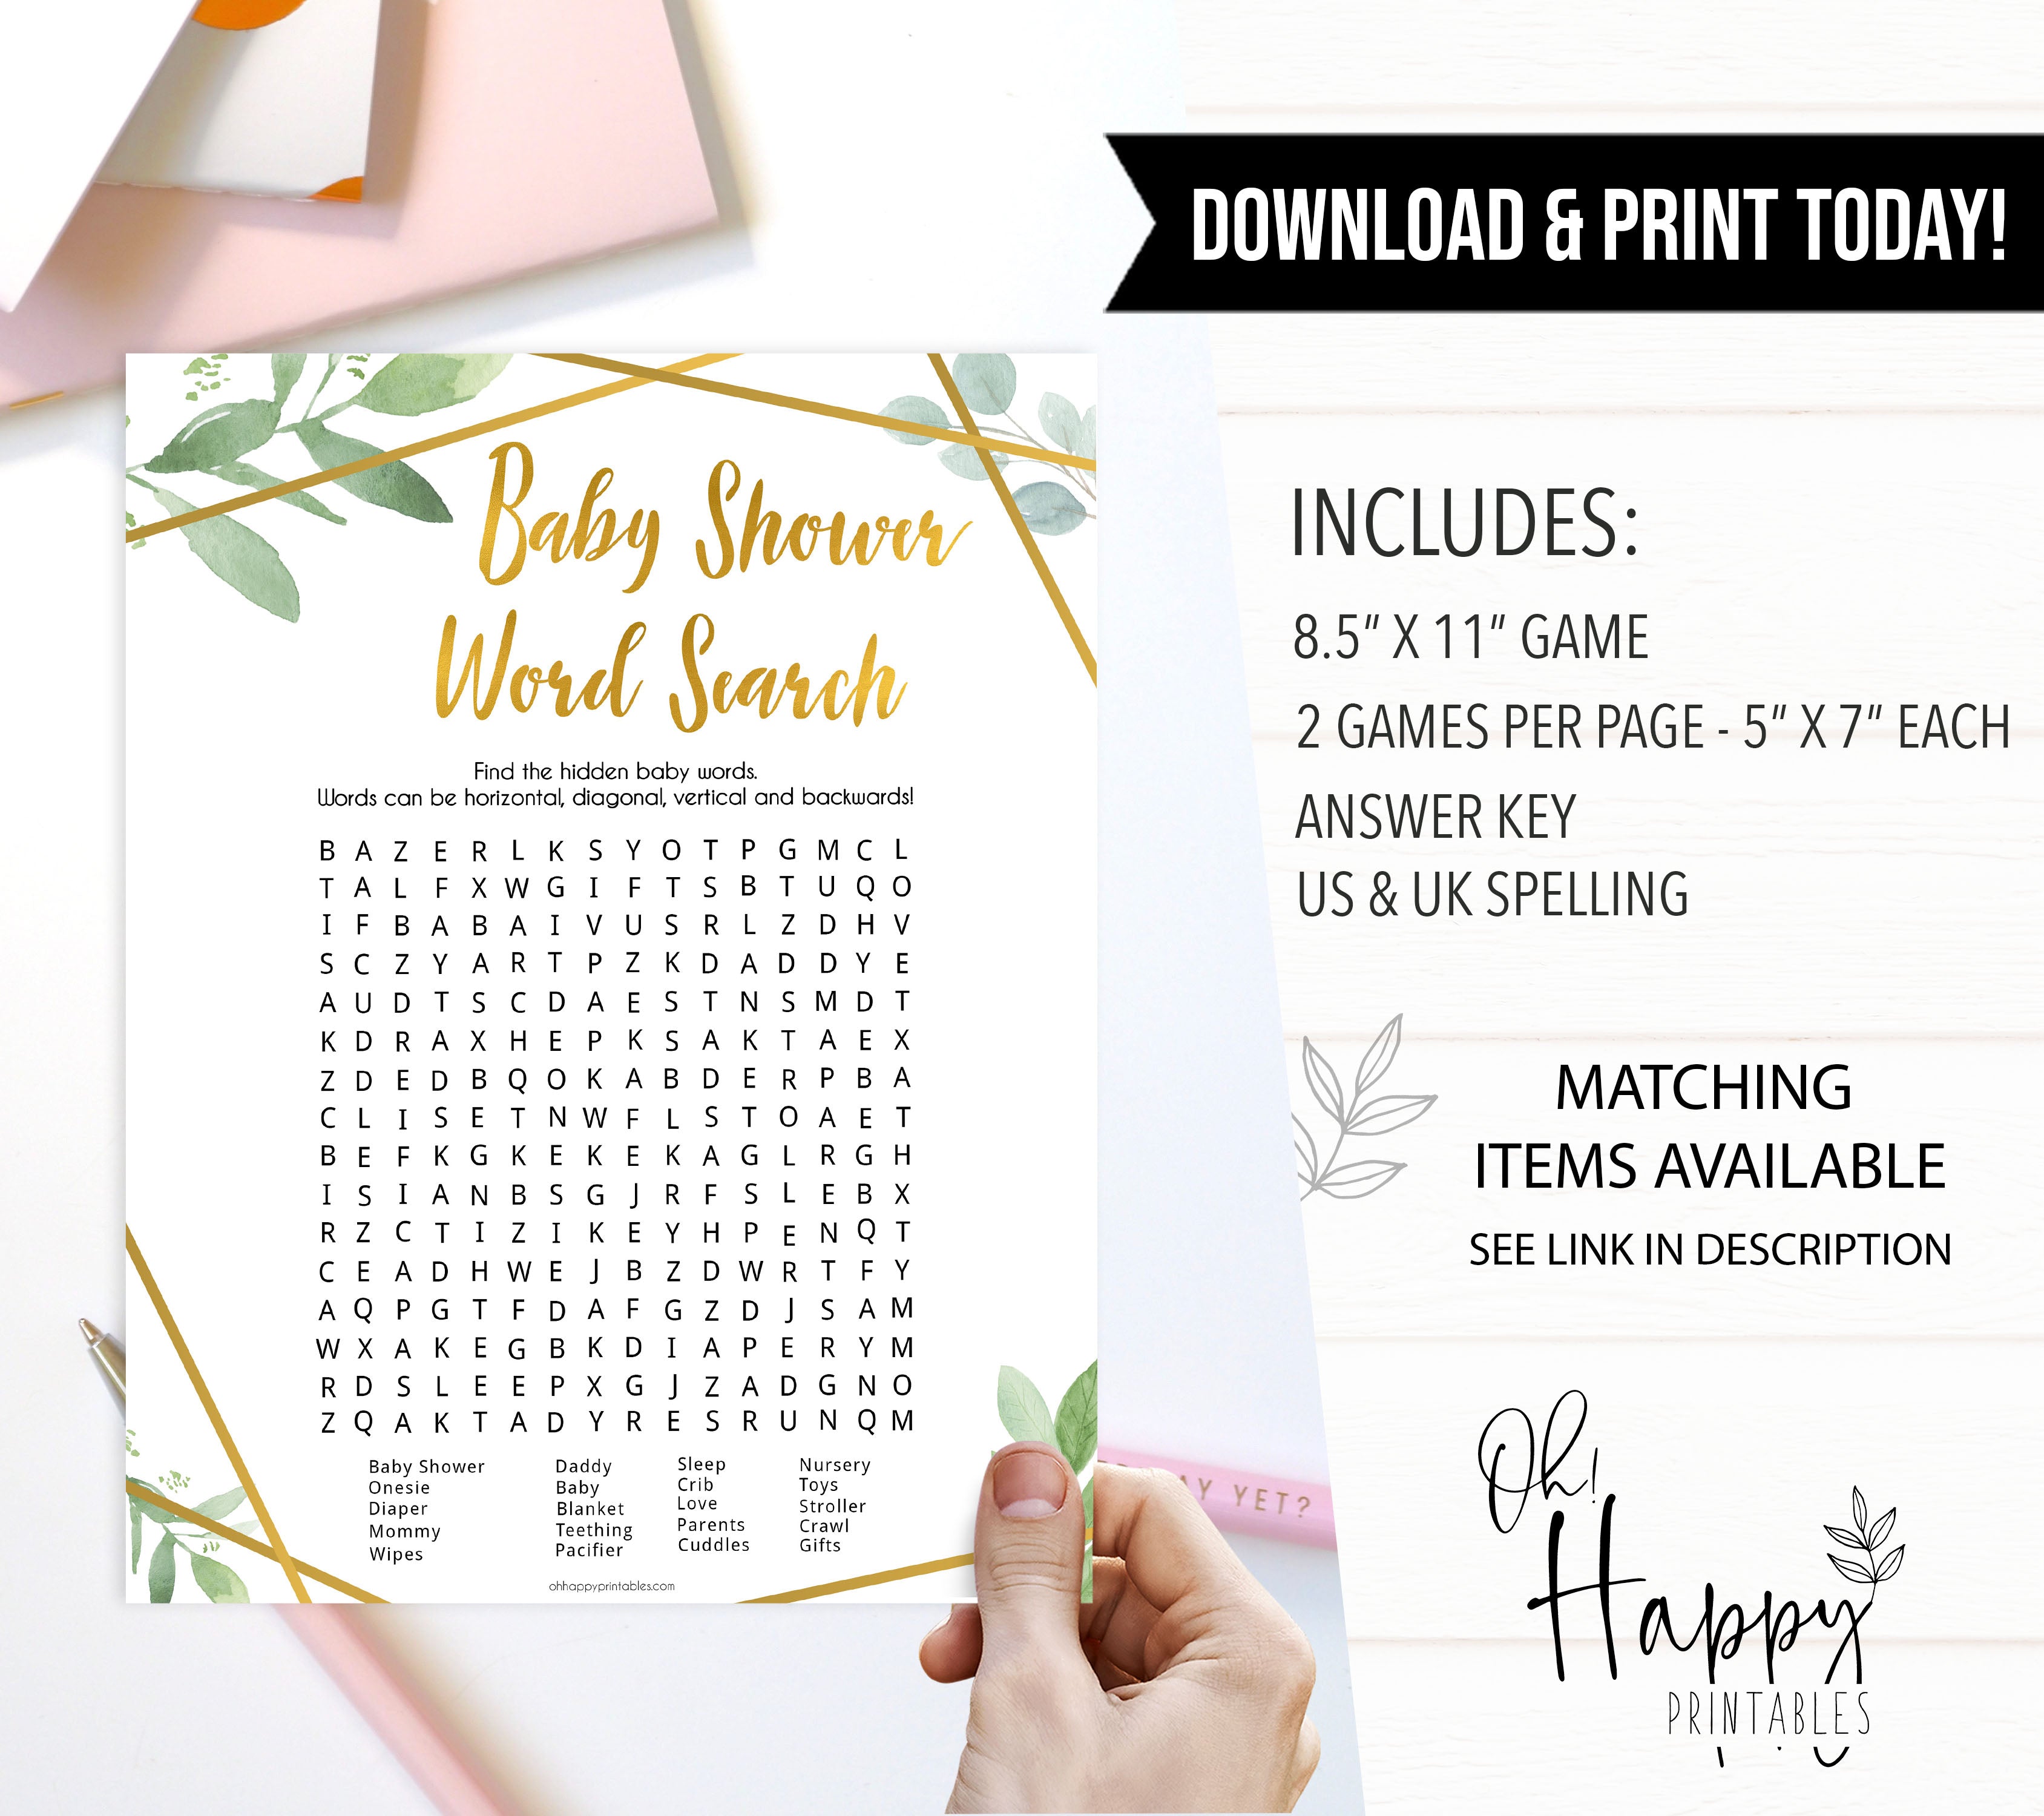 baby shower word search, baby word search game, Printable baby shower games, geometric fun baby games, baby shower games, fun baby shower ideas, top baby shower ideas, gold baby shower, blue baby shower ideas